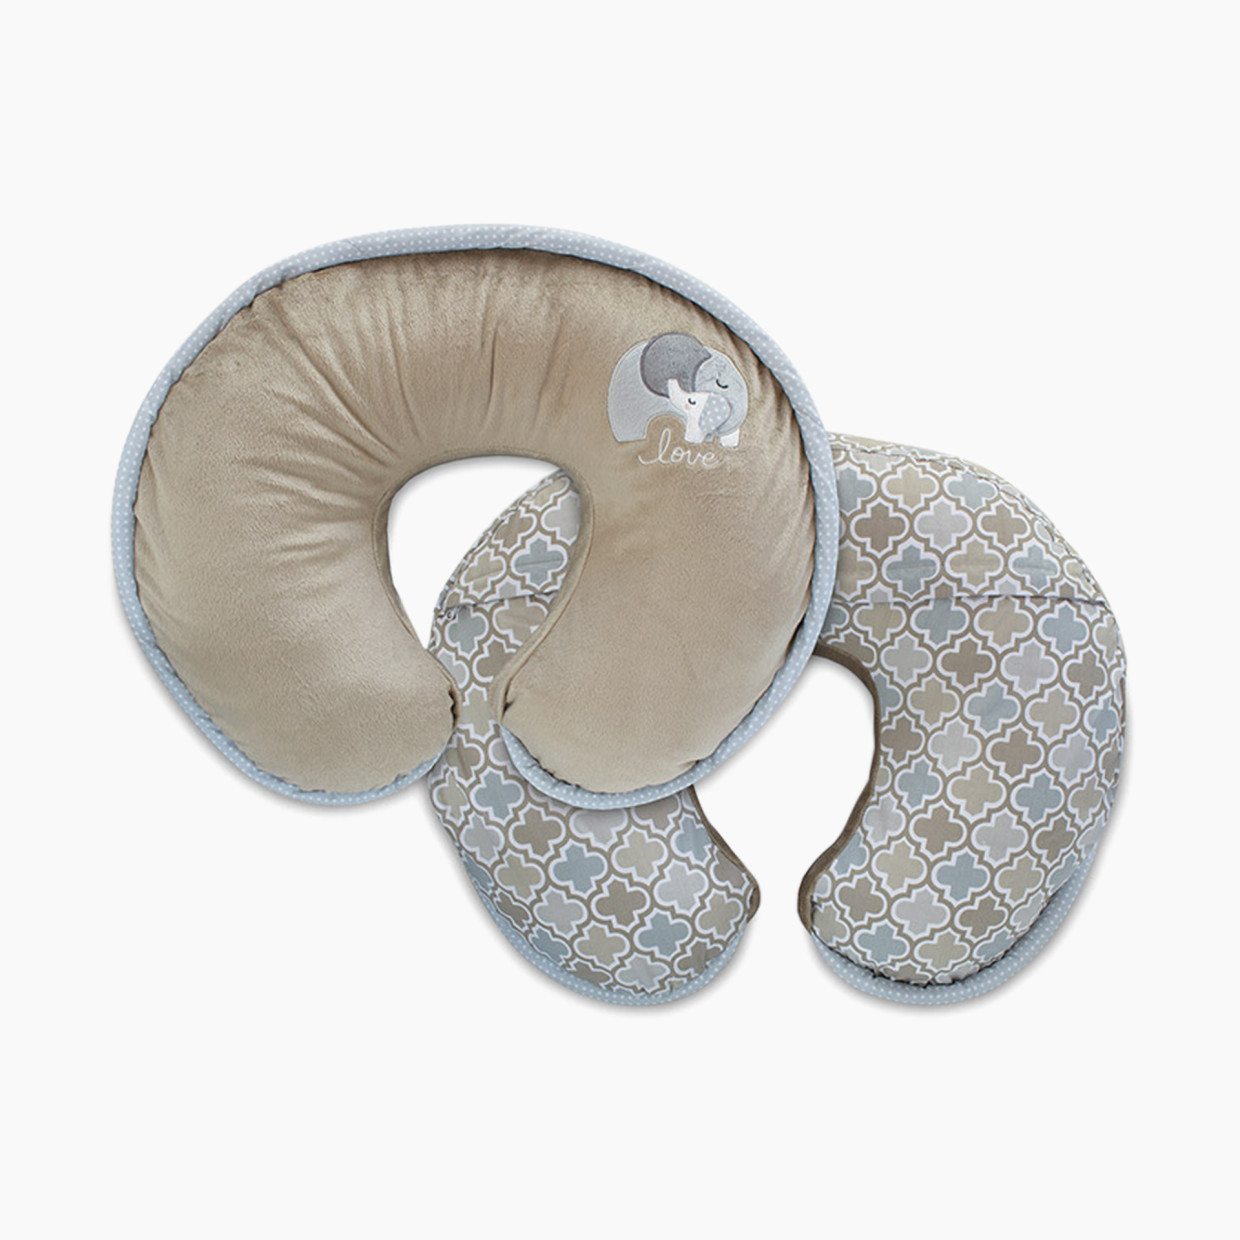 Boppy Luxe Support Nursing Pillow - Taupe Elephant Snuggle.